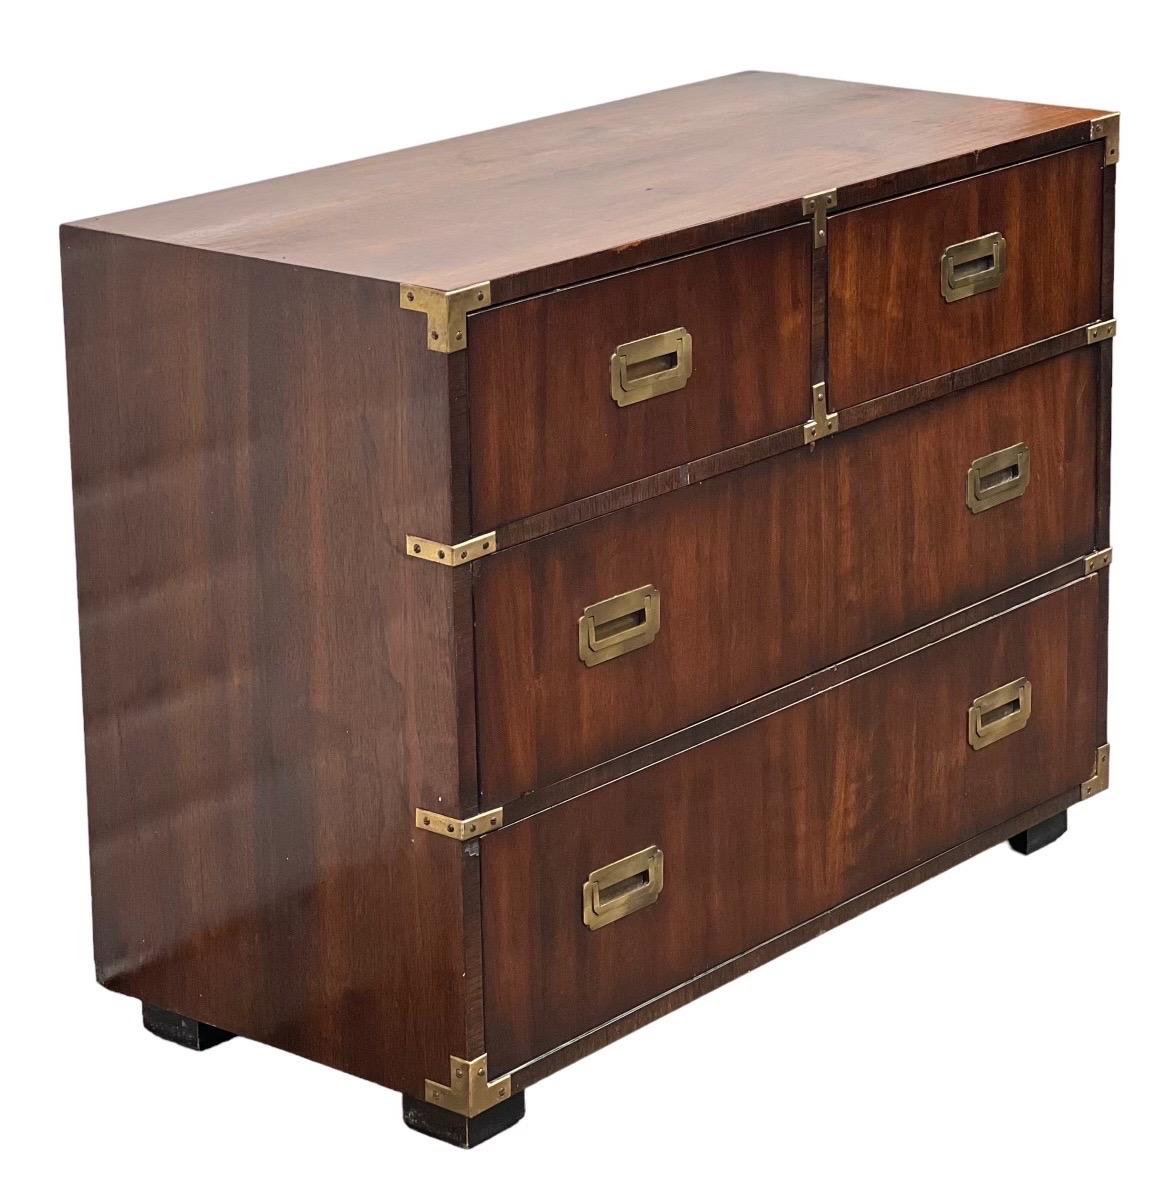 Wood Vintage Campaign Dresser by Lane, Dovetail Drawers